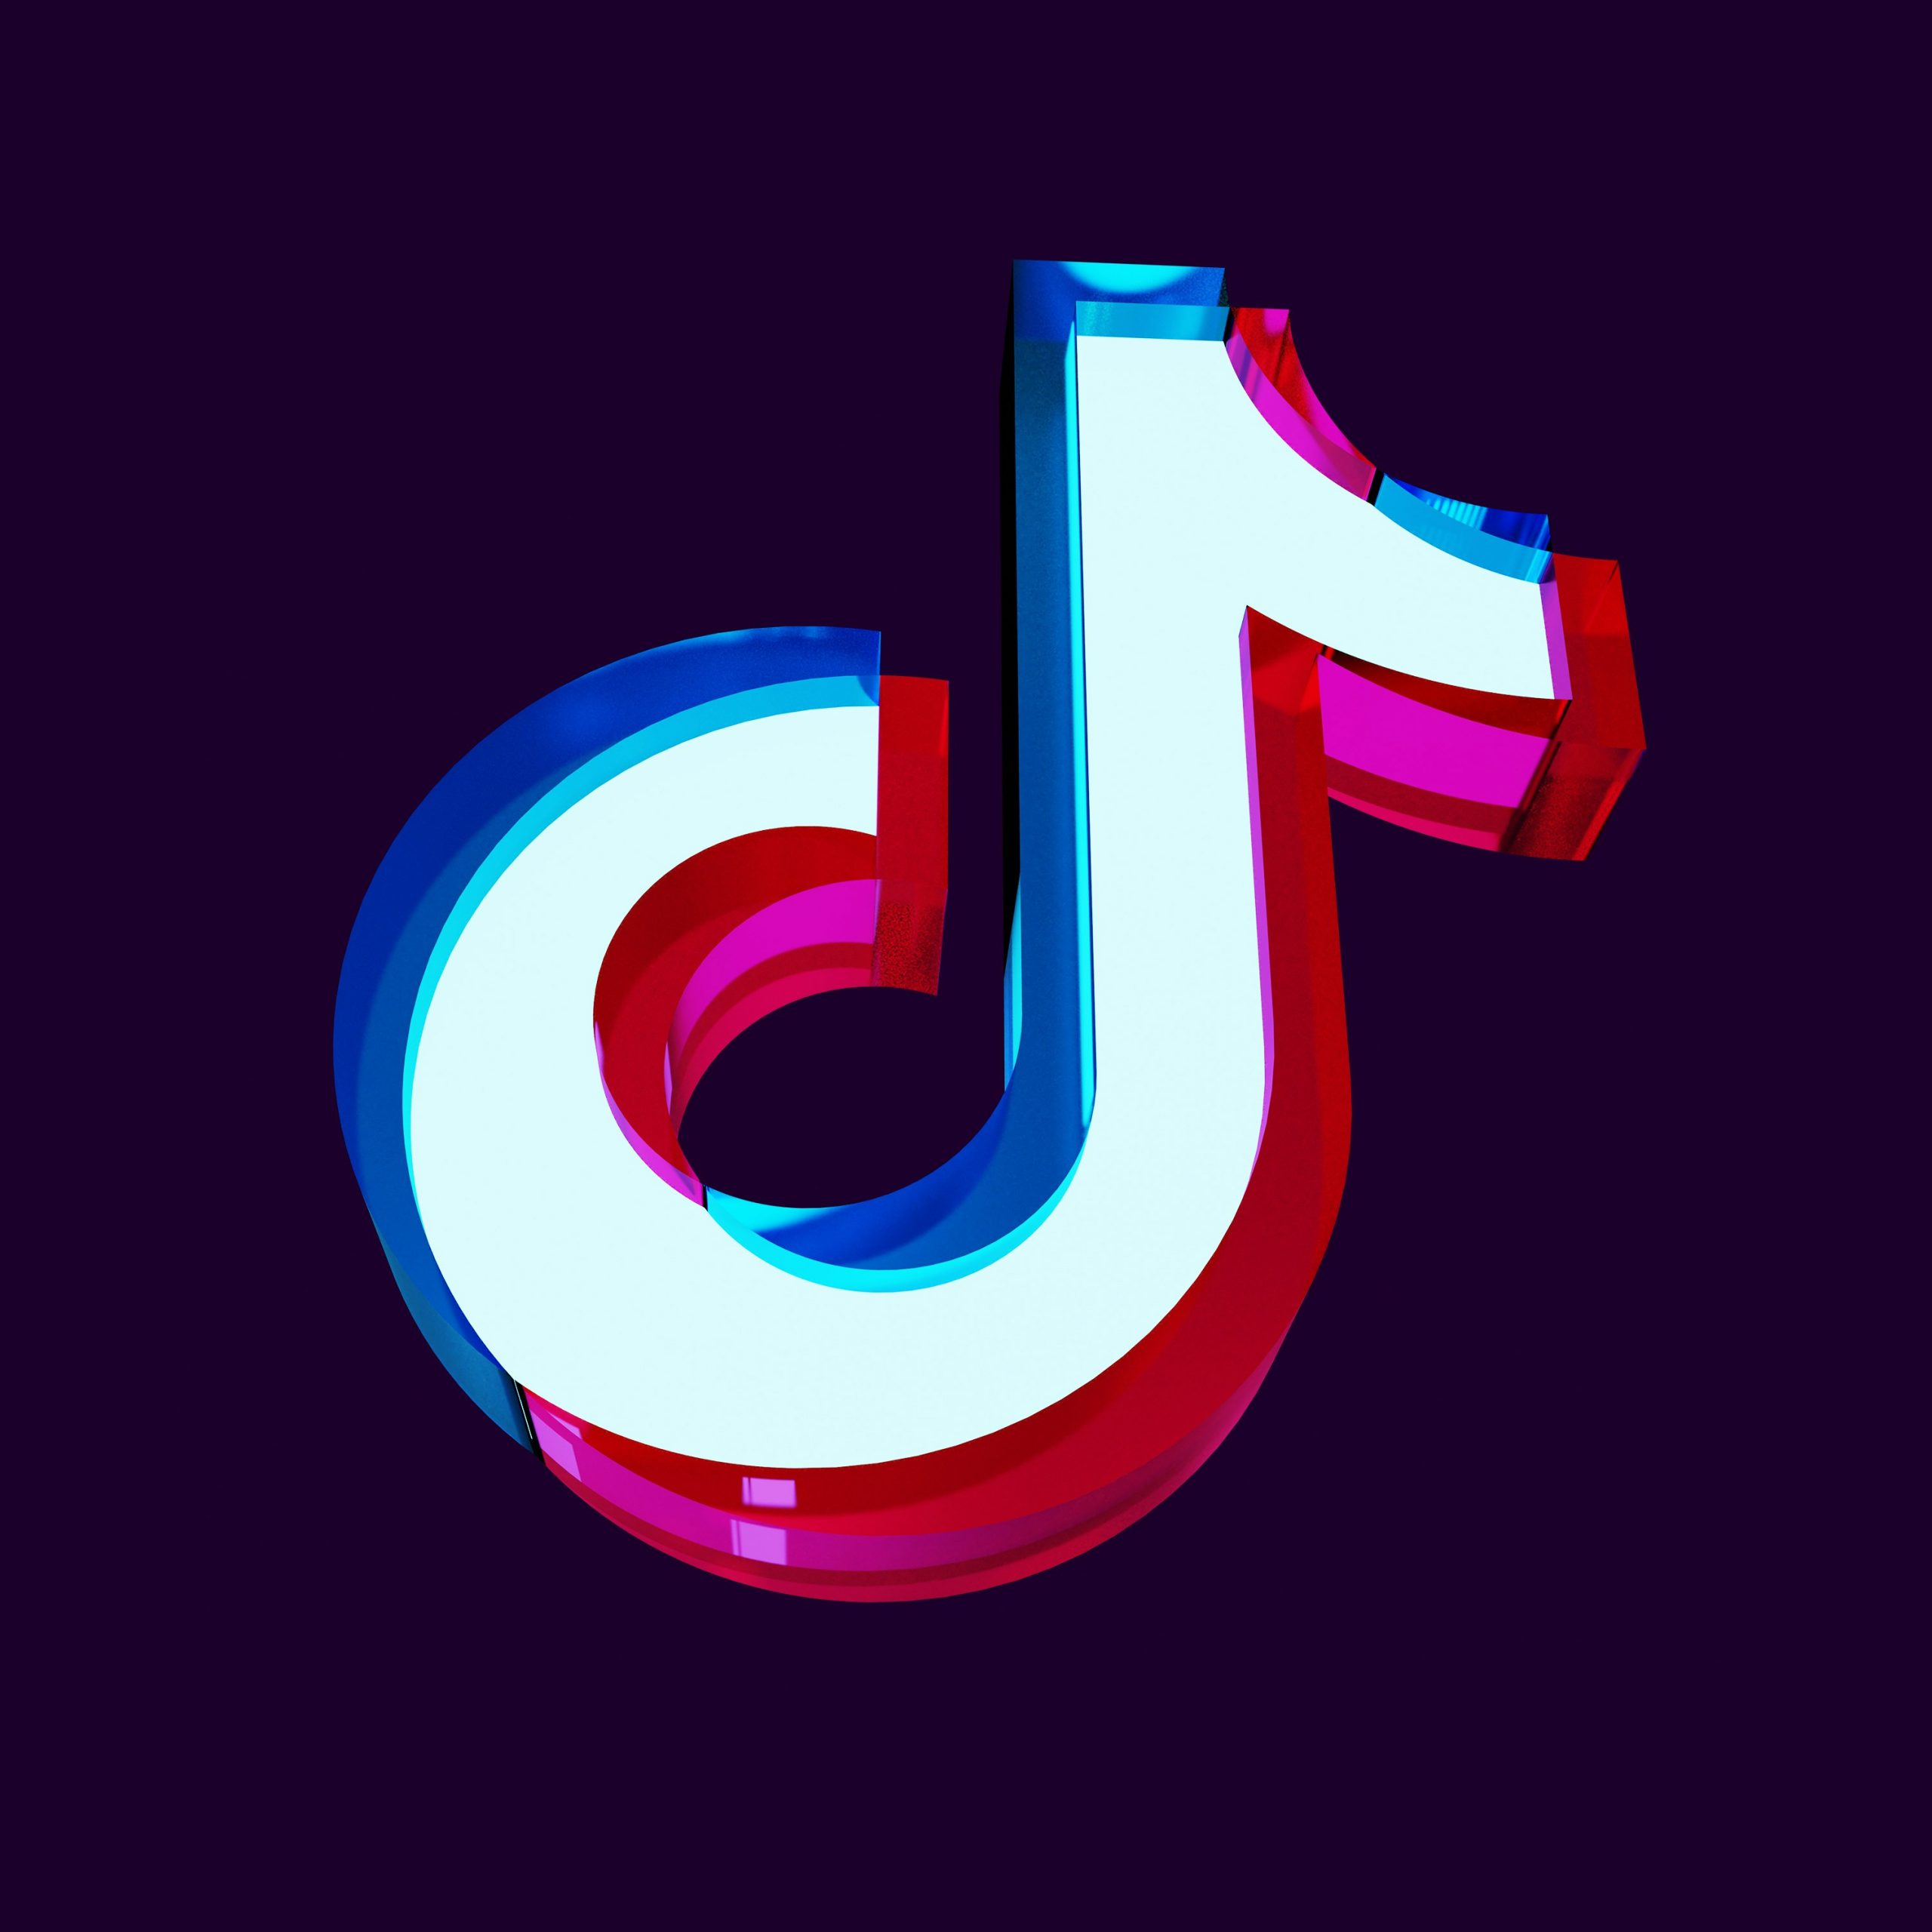 The TikTok logo in red, white and blue on a black background